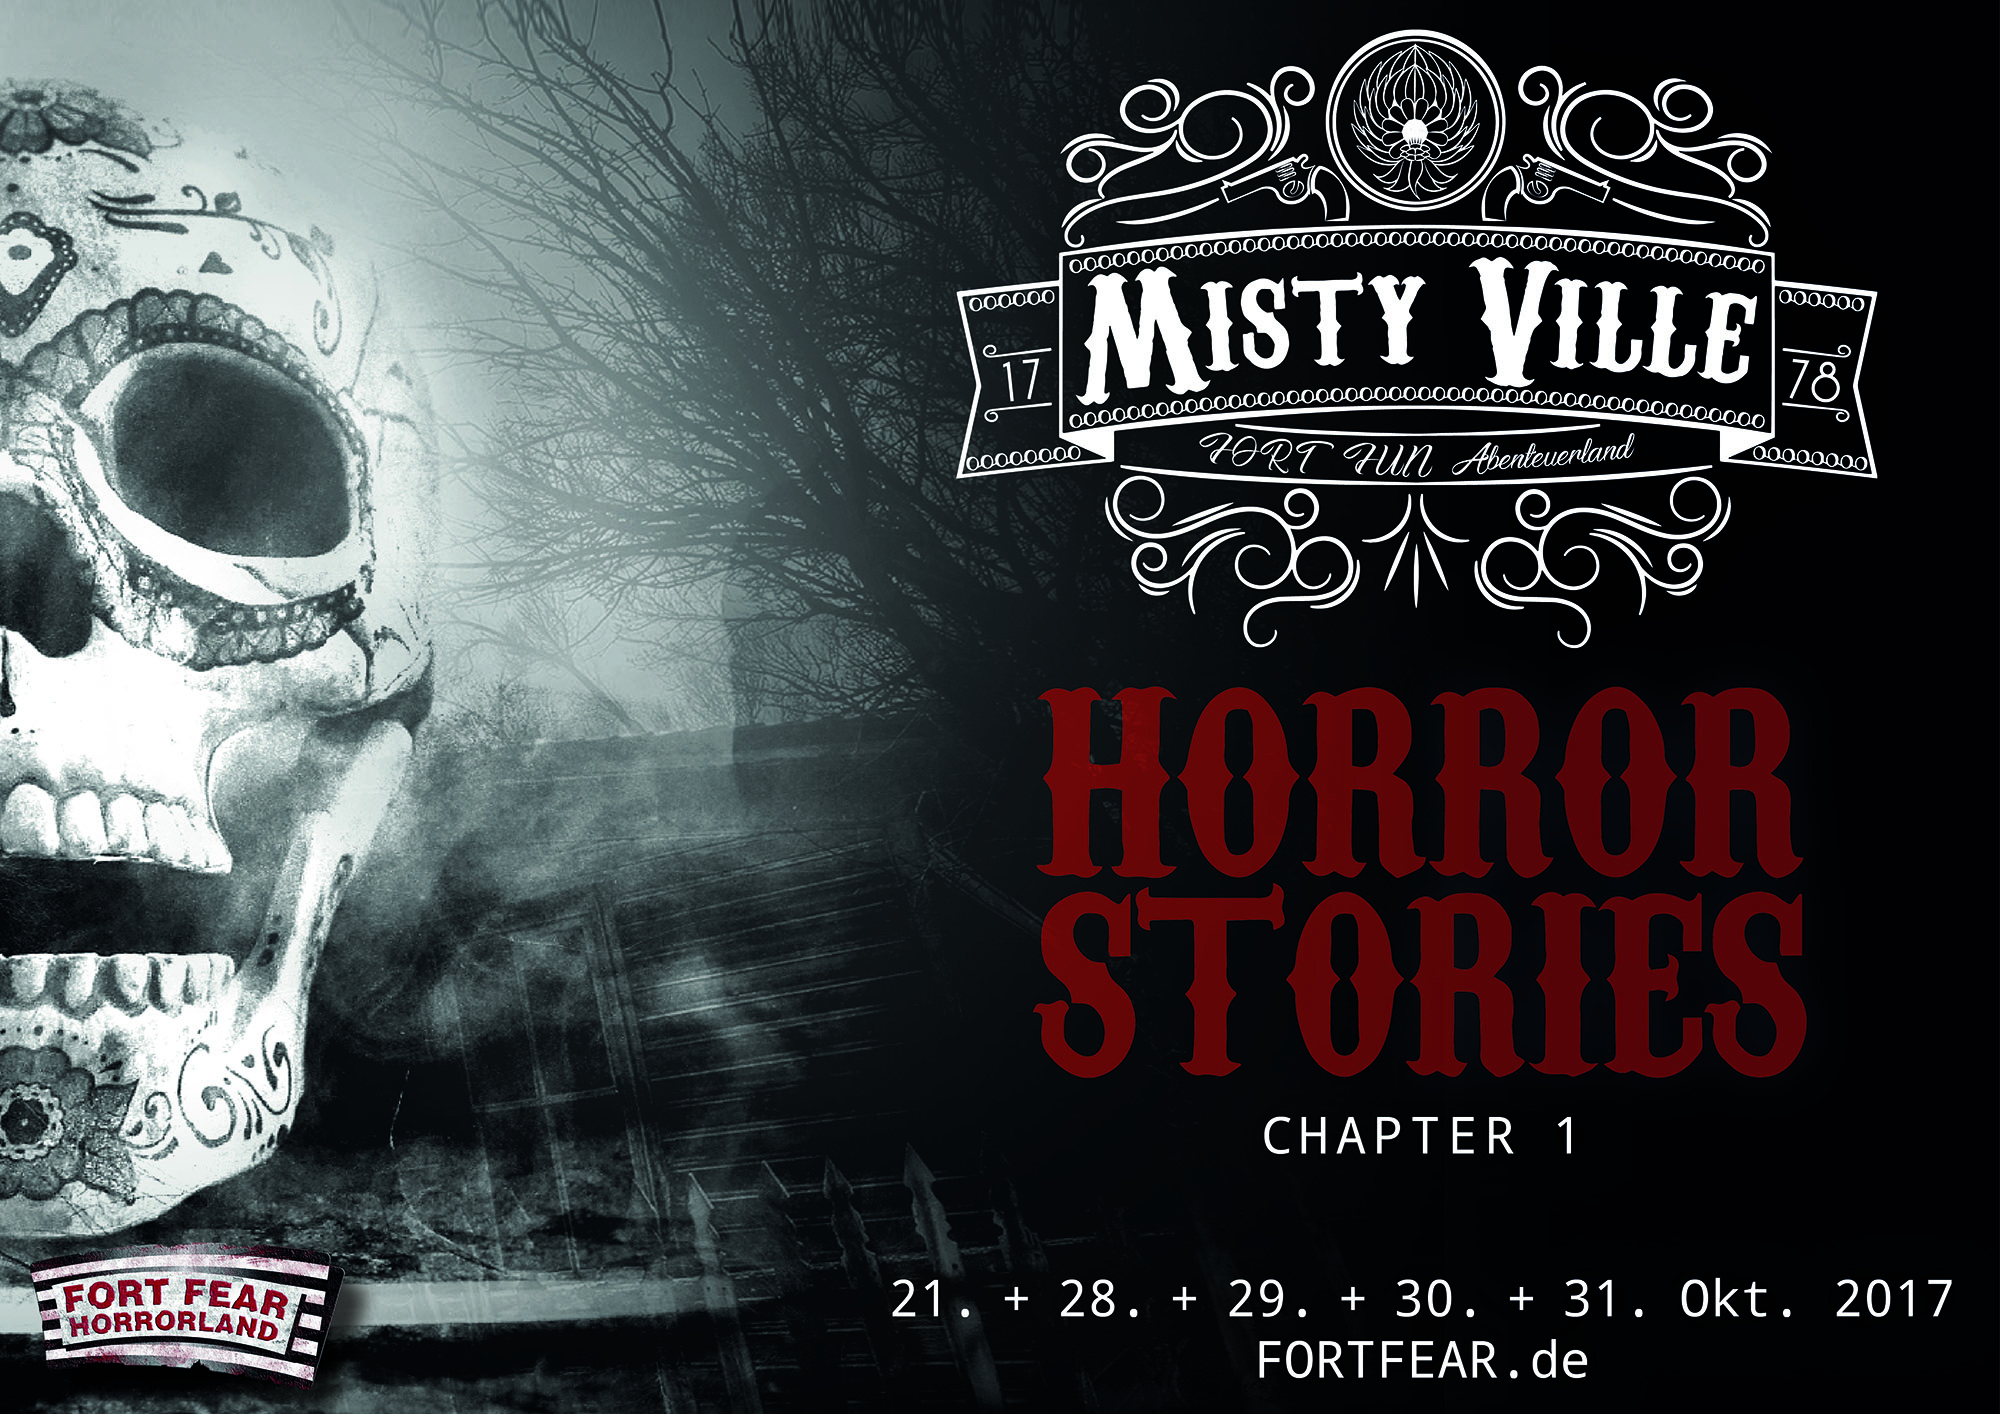 You are currently viewing Fort Fear Horrorland mit neuer Geschichte in 2017: Misty Ville Horror Stories – Chapter 1